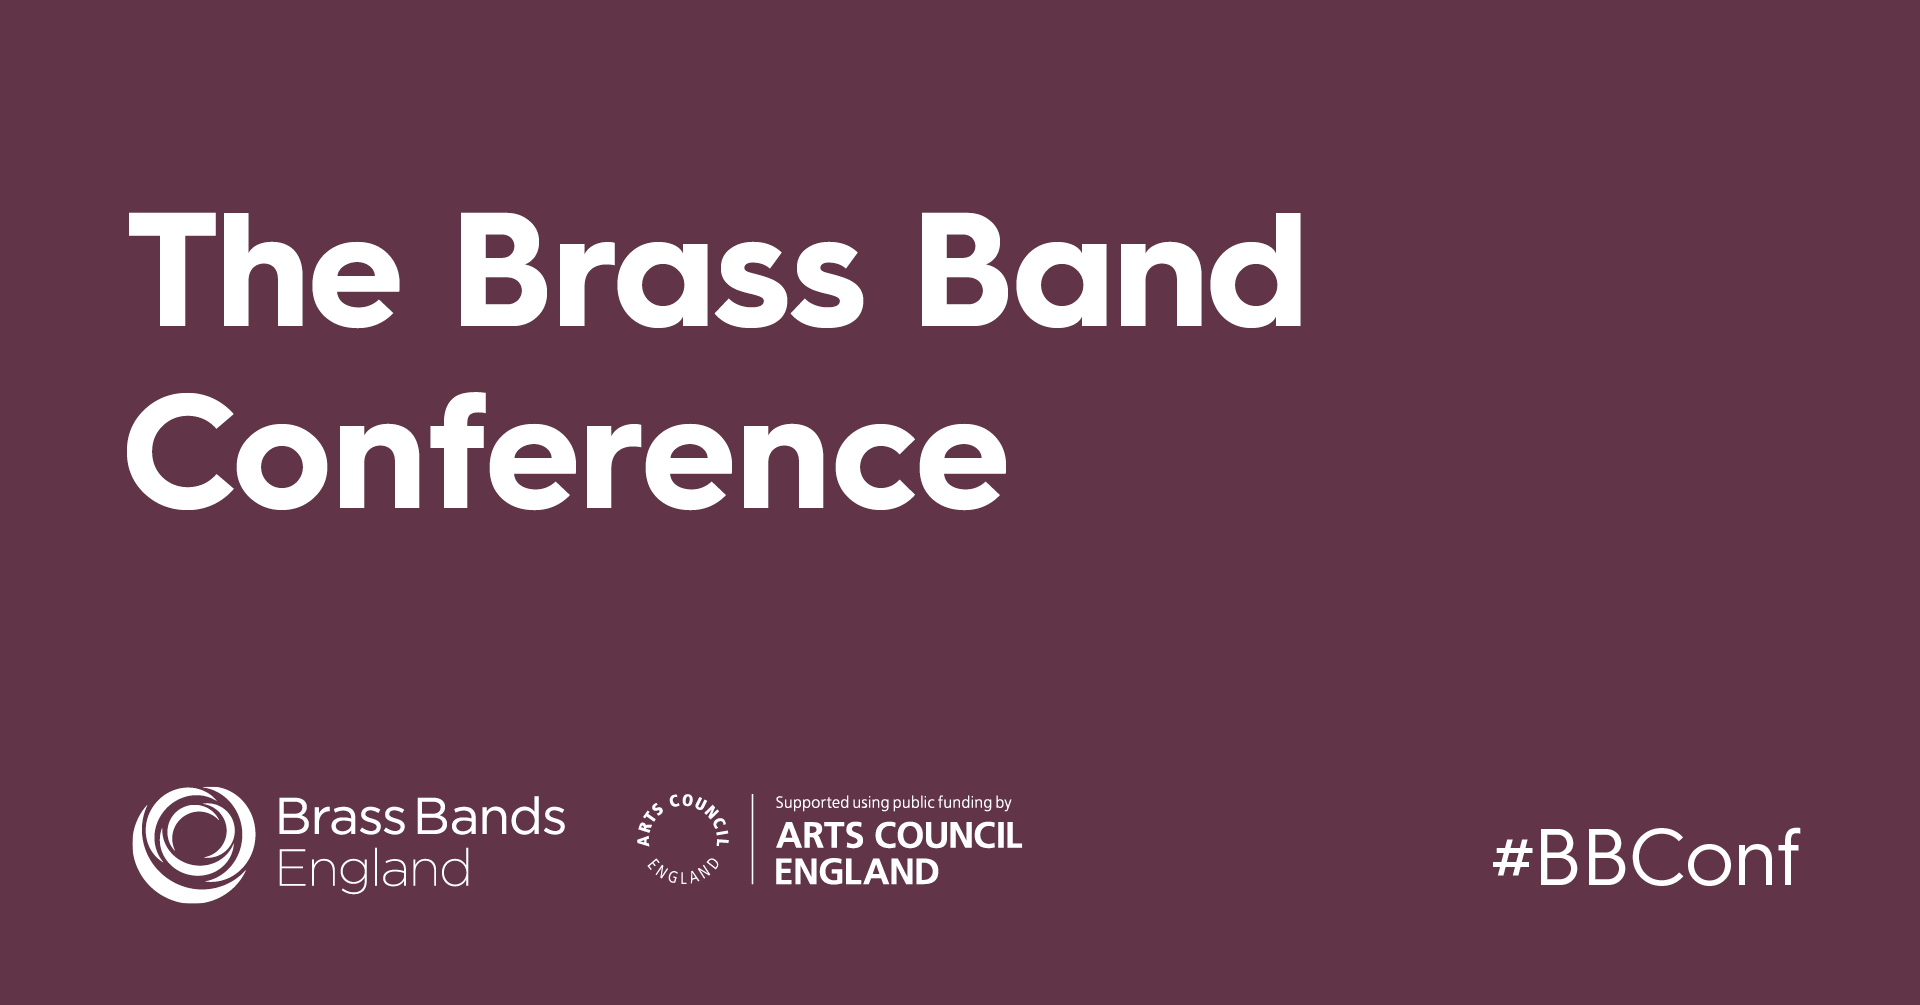 Text reads "The Brass Band Conference!" in bold white on a purple background